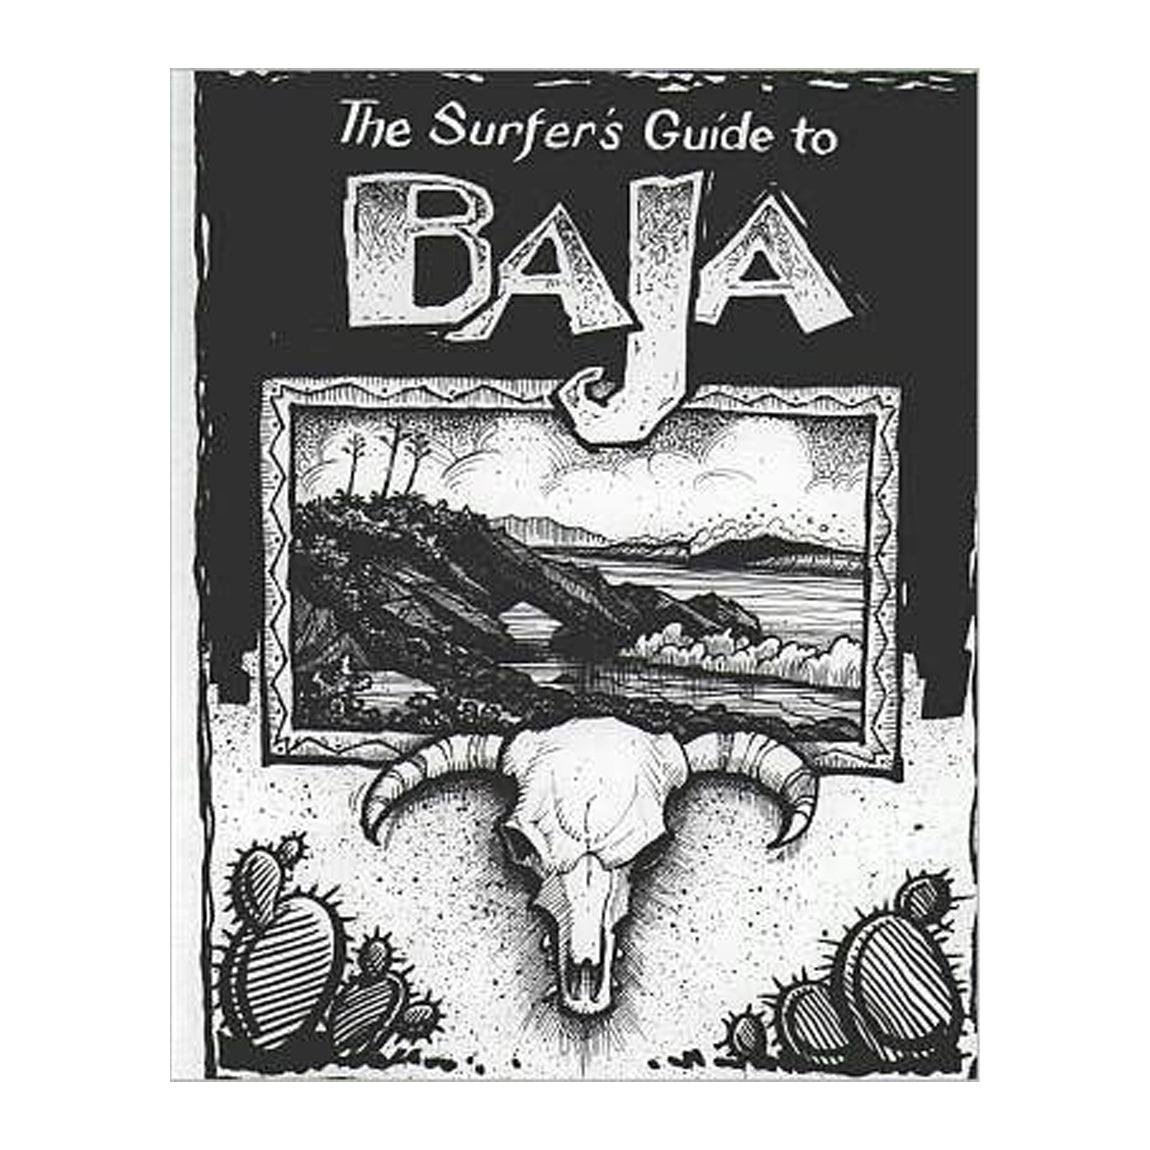 THE SURFERS GUIDE TO BAJA BY MIKE PARISE